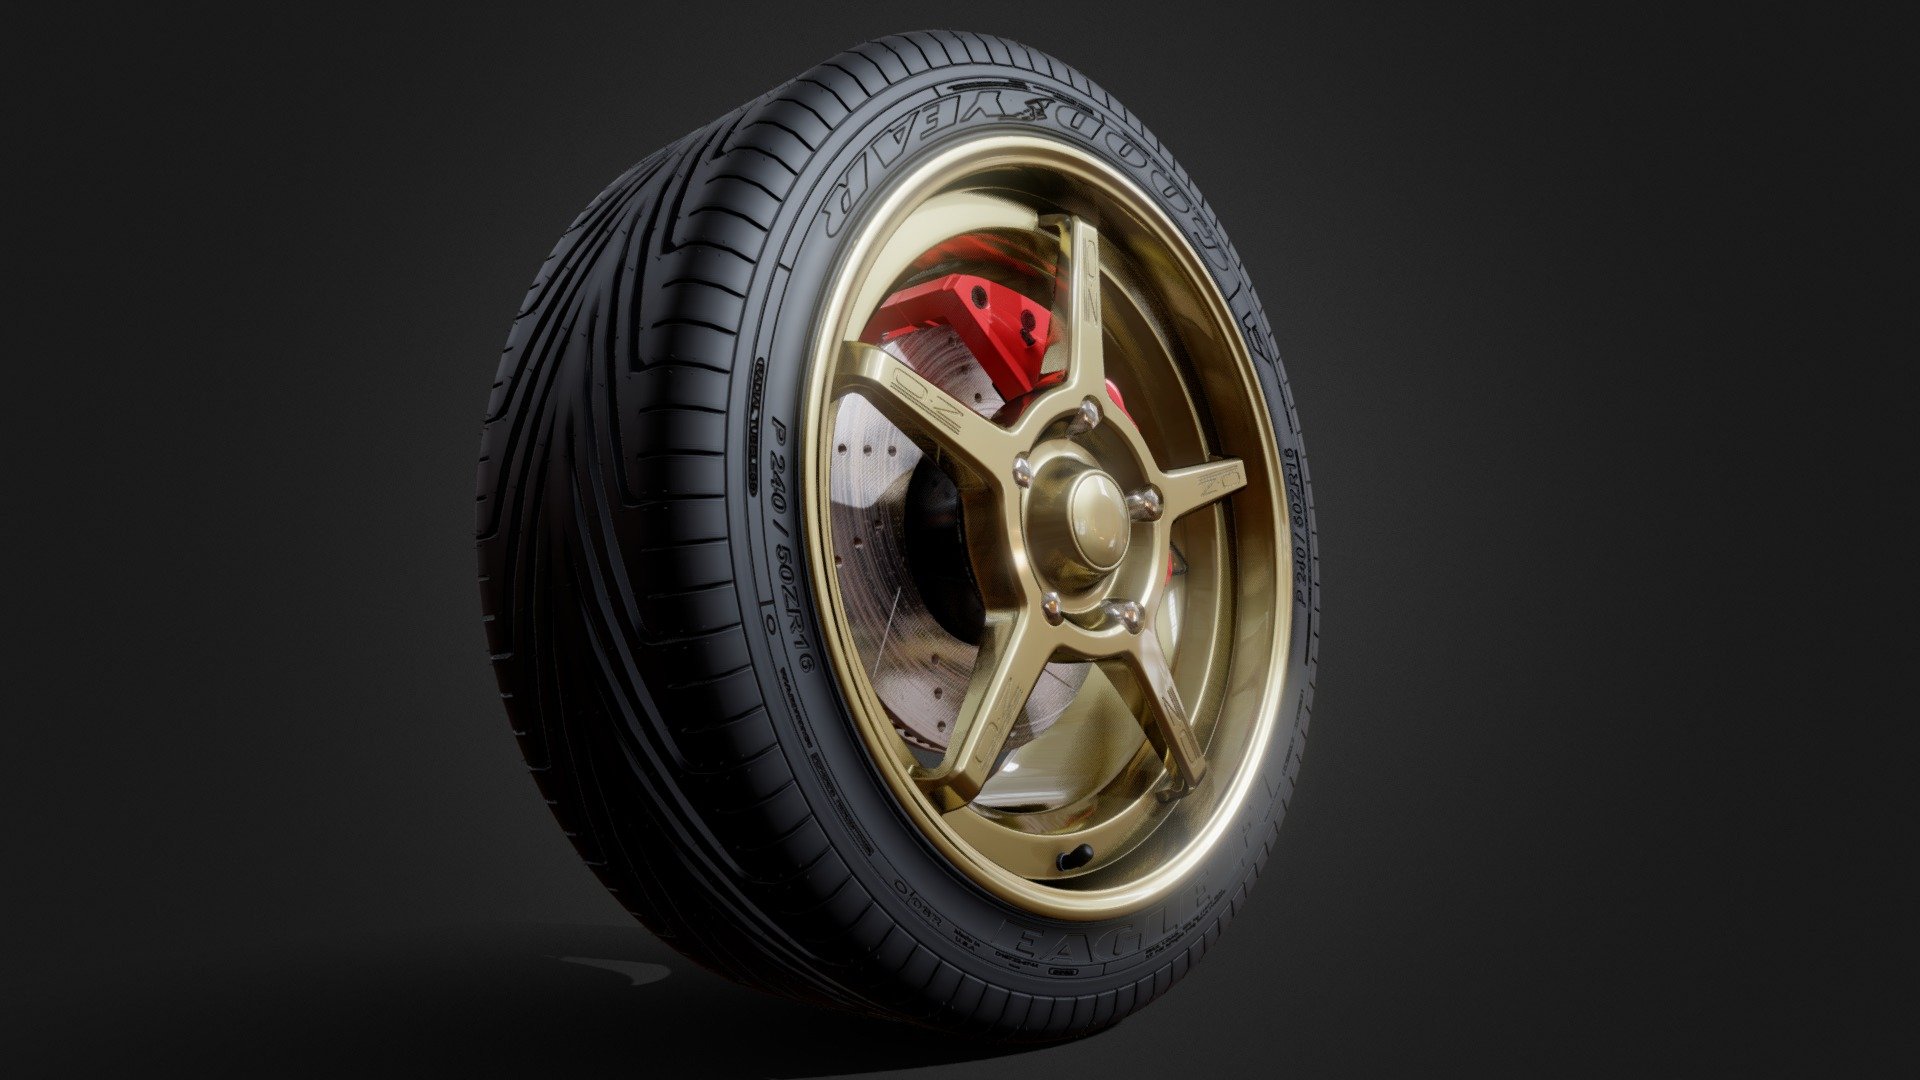 I have prepared an aluminum disc from OZ racing for your cars. The car wheel is also ready with a Brembo brake 3d model